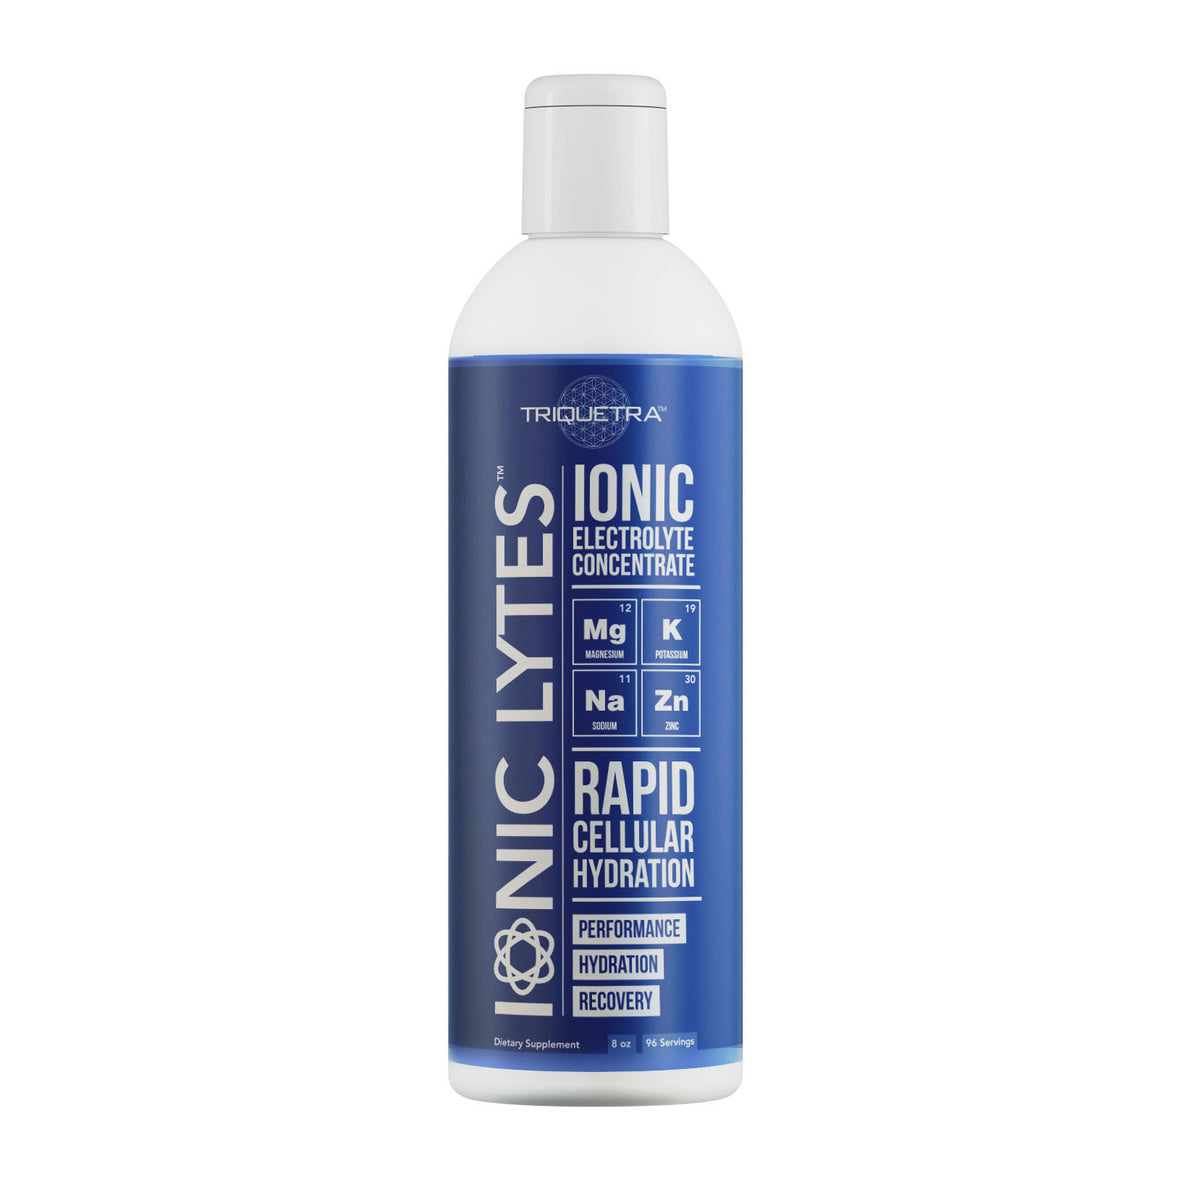 Ionic Lytes™ Electrolyte Concentrate